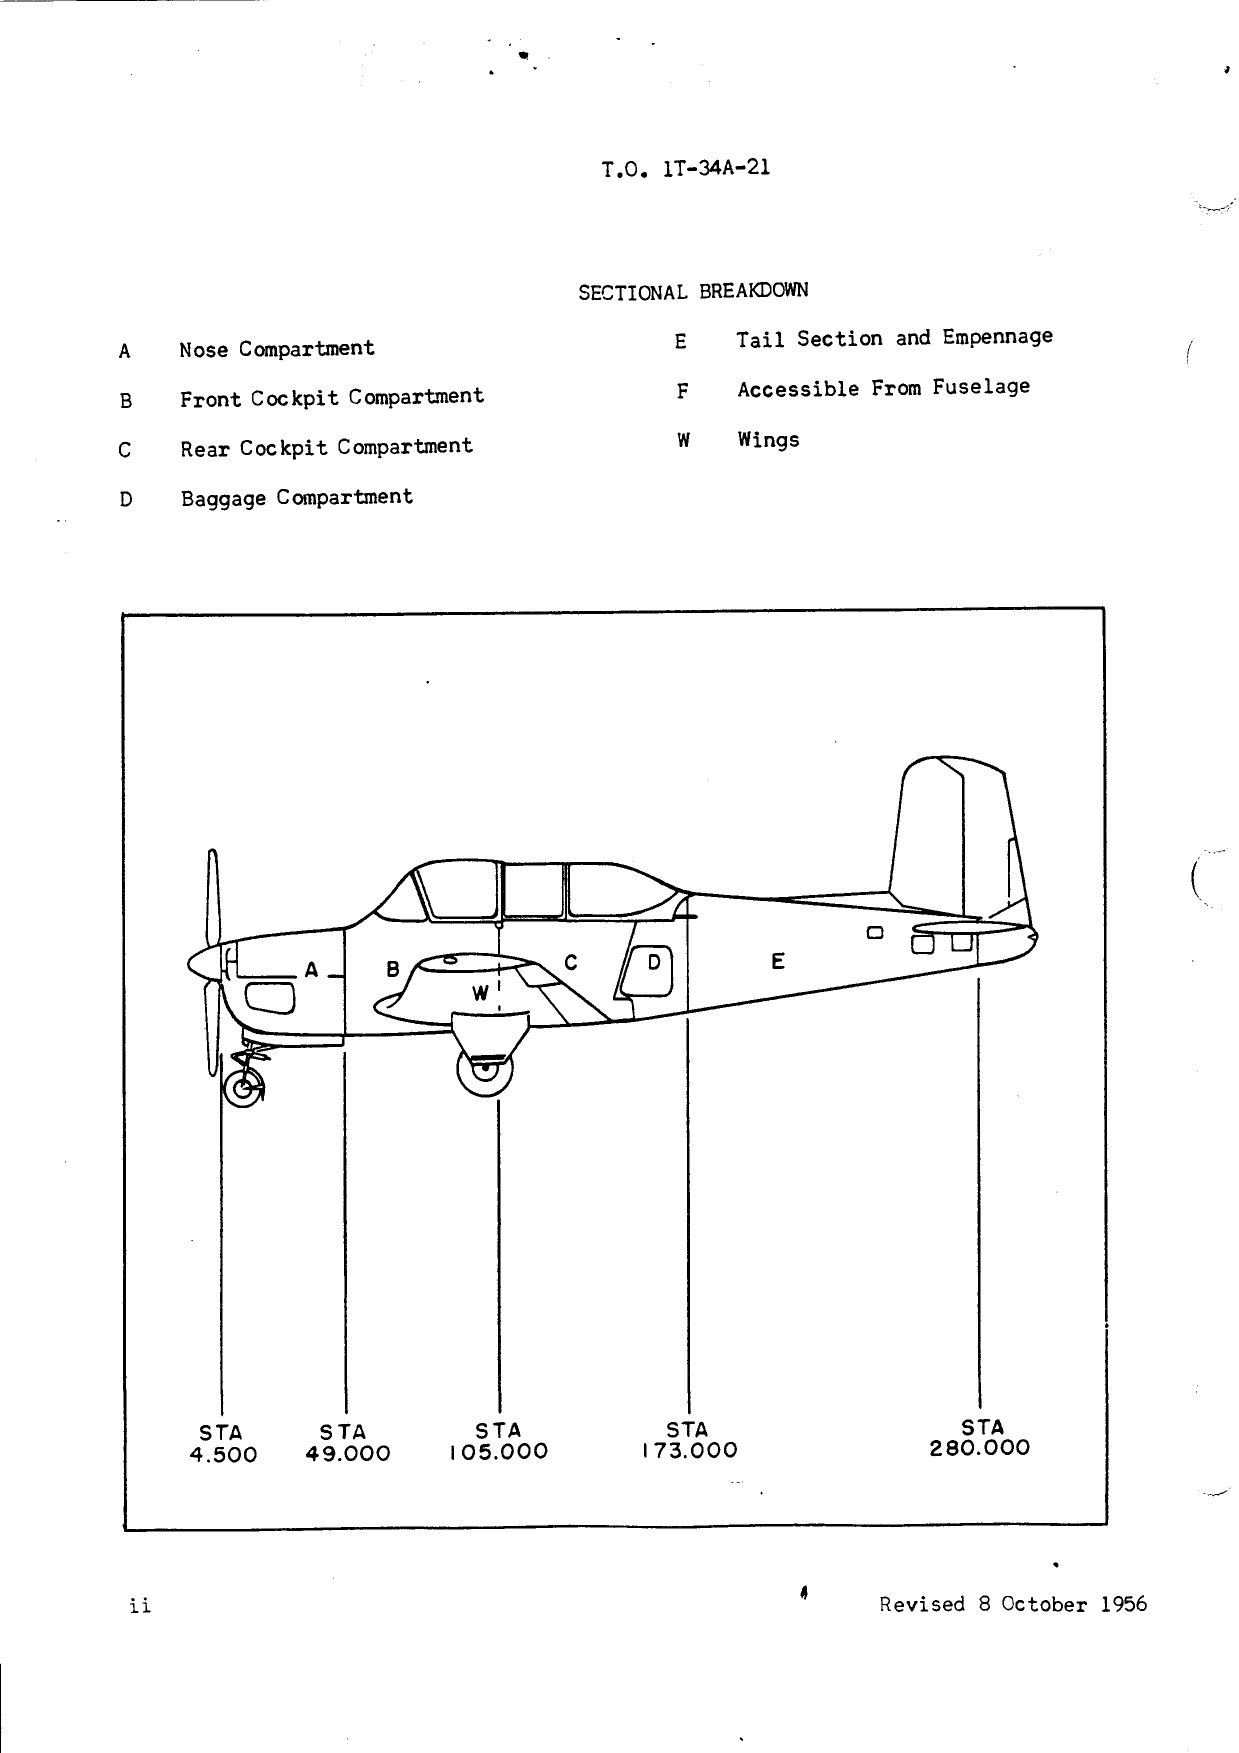 Sample page 4 from AirCorps Library document: Master Guide Aircraft Inventory Record for T-34A Aircraft